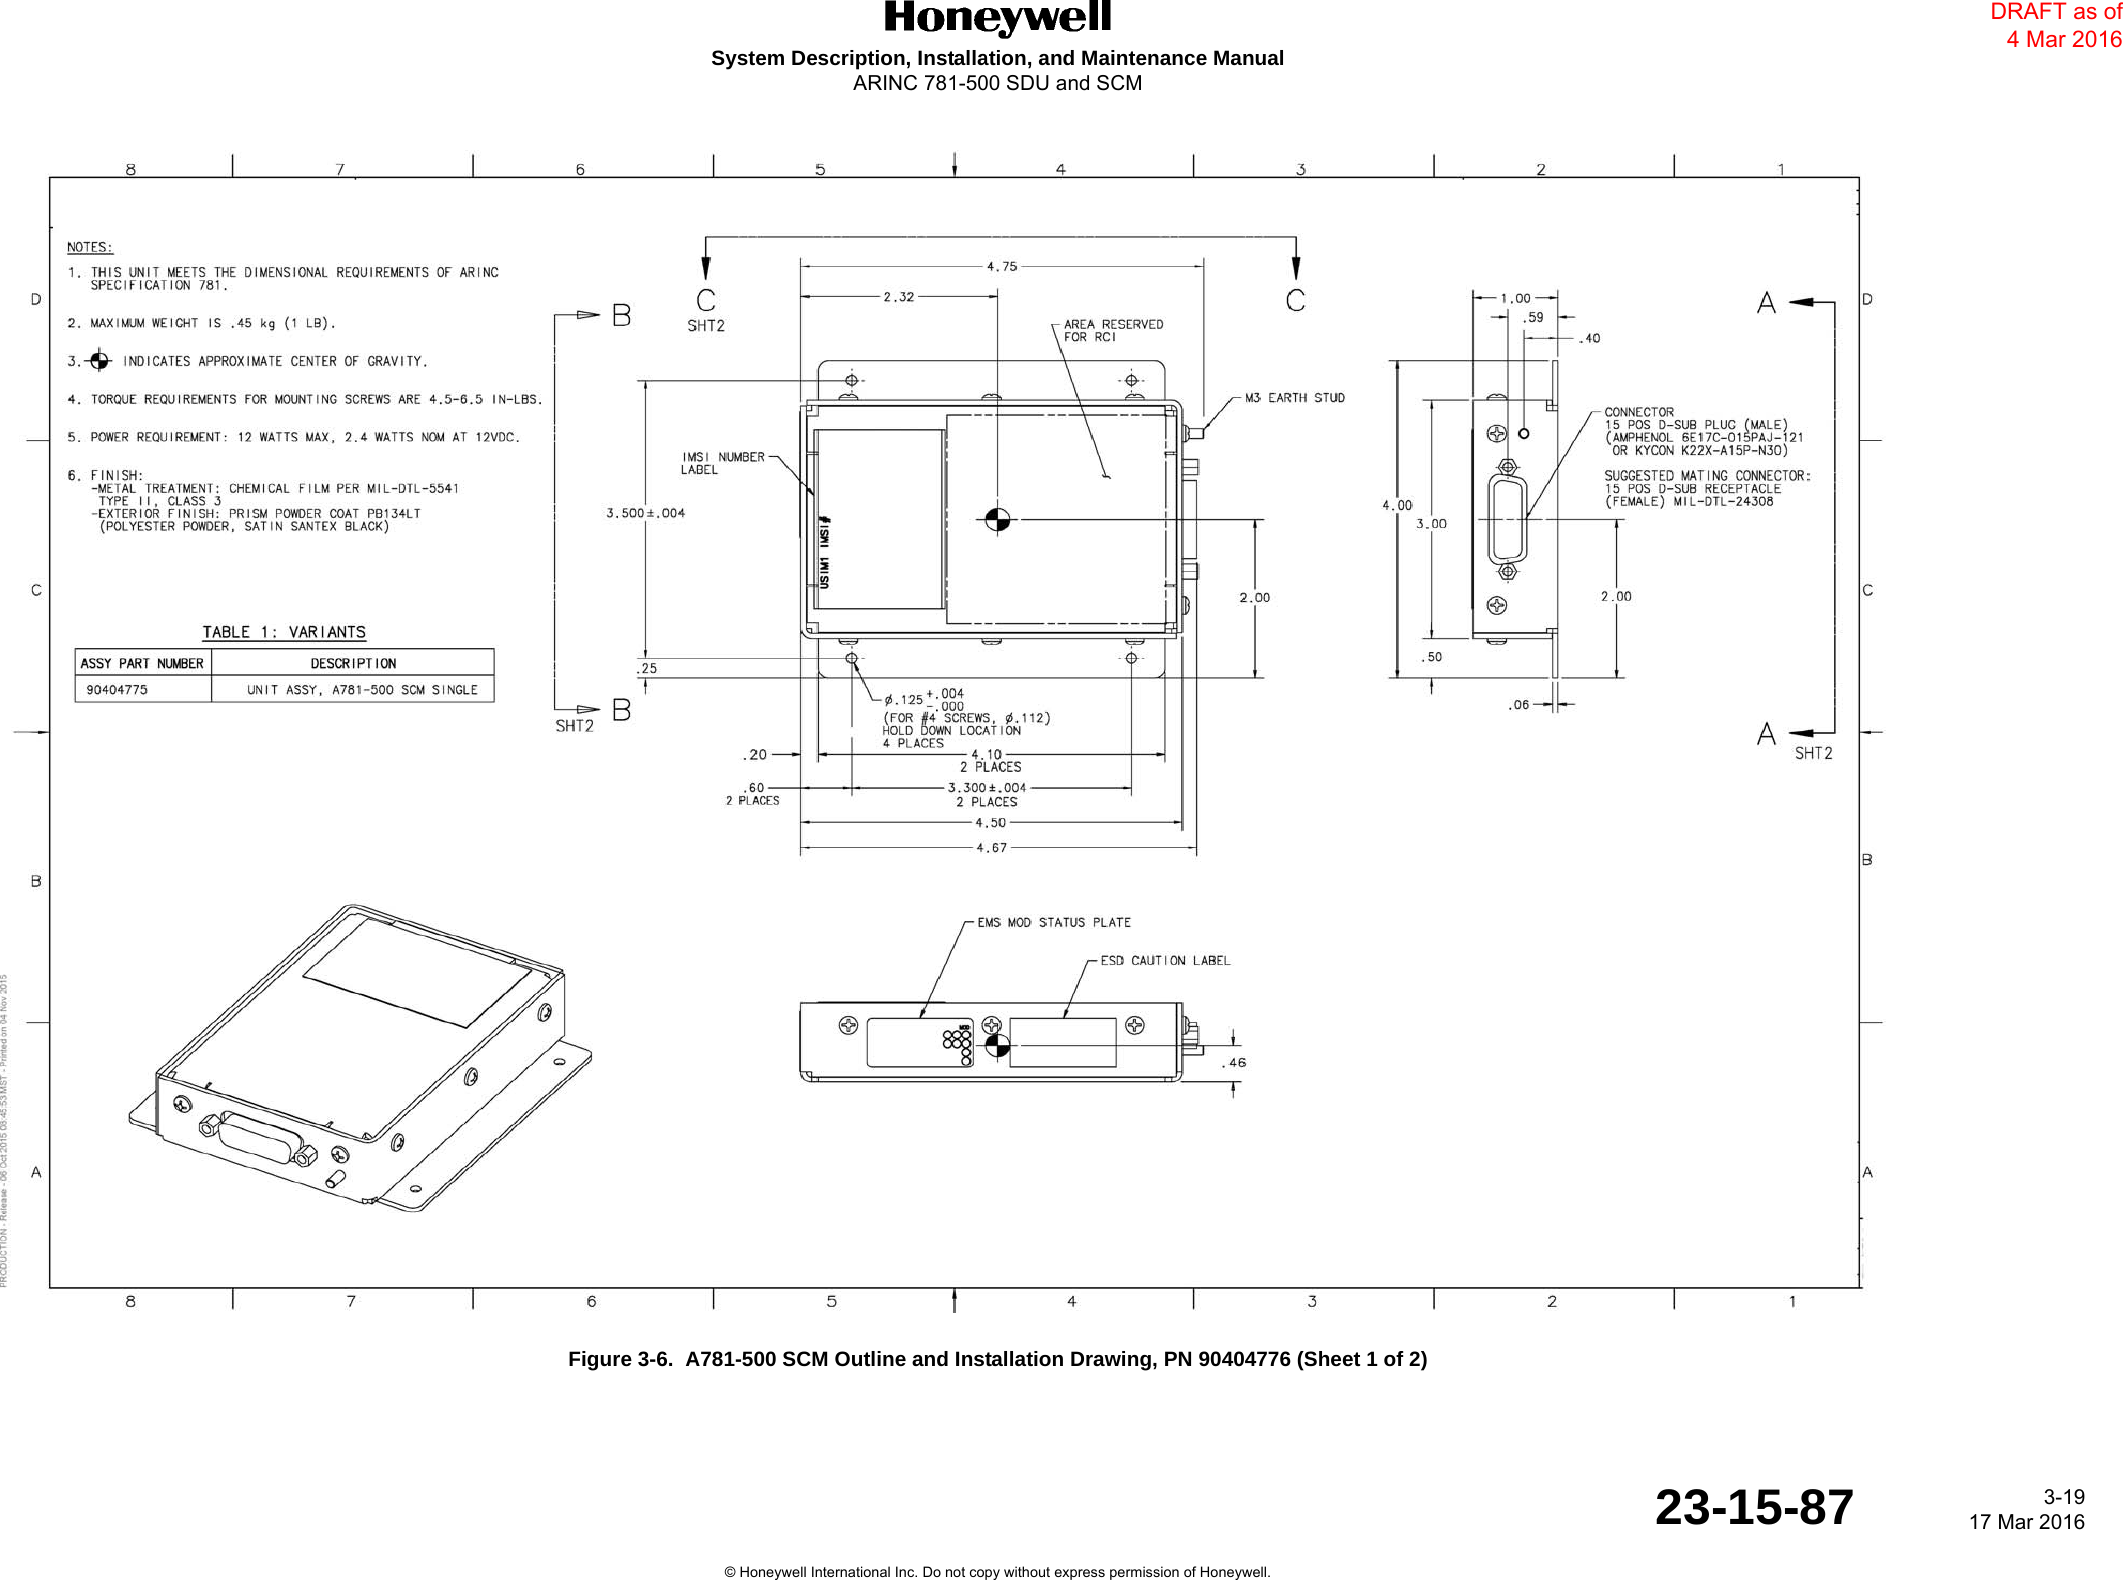 DRAFTSystem Description, Installation, and Maintenance ManualARINC 781-500 SDU and SCM 3-1917 Mar 201623-15-87© Honeywell International Inc. Do not copy without express permission of Honeywell.Figure 3-6.  A781-500 SCM Outline and Installation Drawing, PN 90404776 (Sheet 1 of 2)DRAFT as of 4 Mar 2016